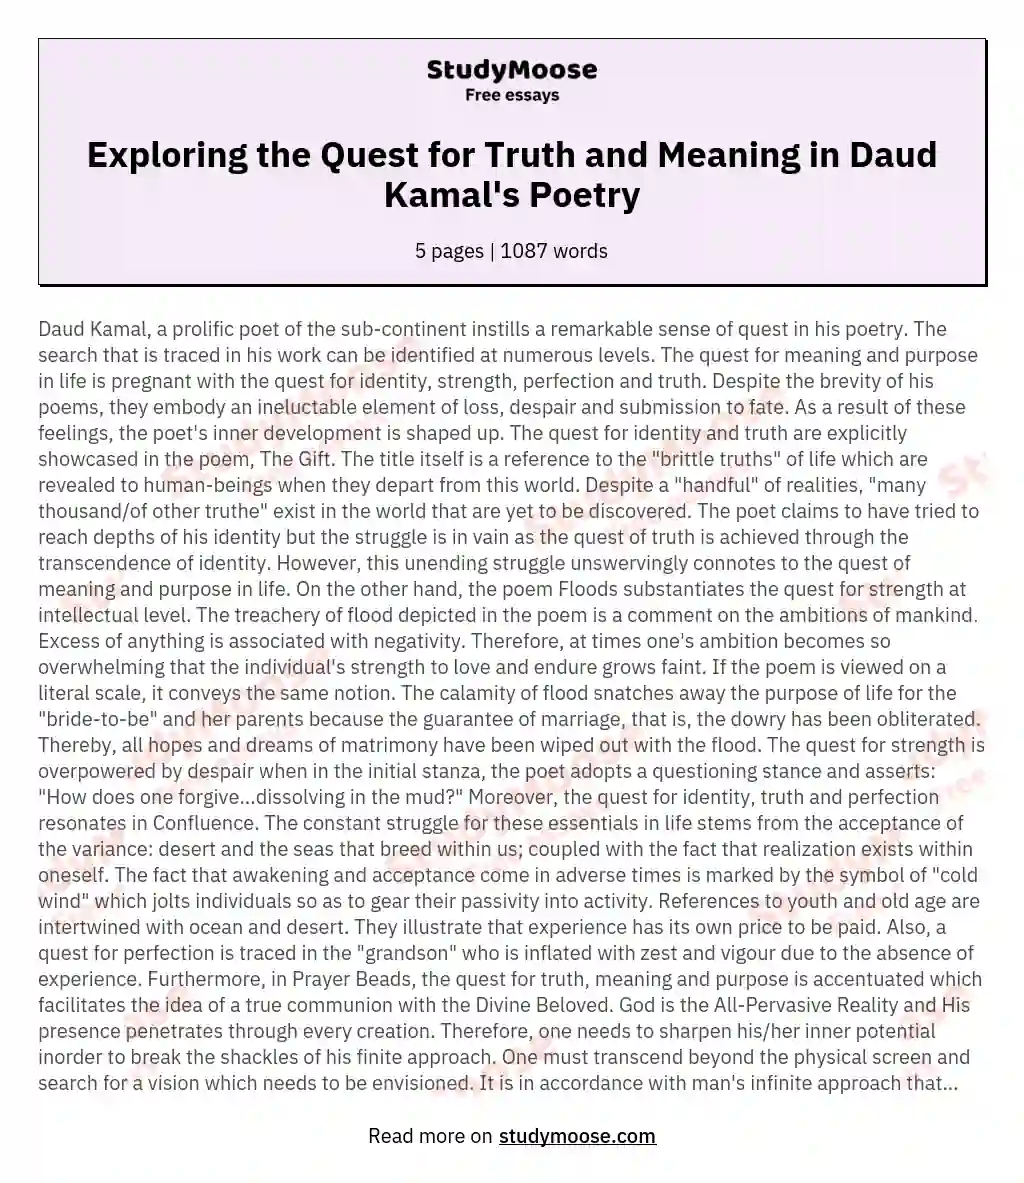 Exploring the Quest for Truth and Meaning in Daud Kamal's Poetry essay